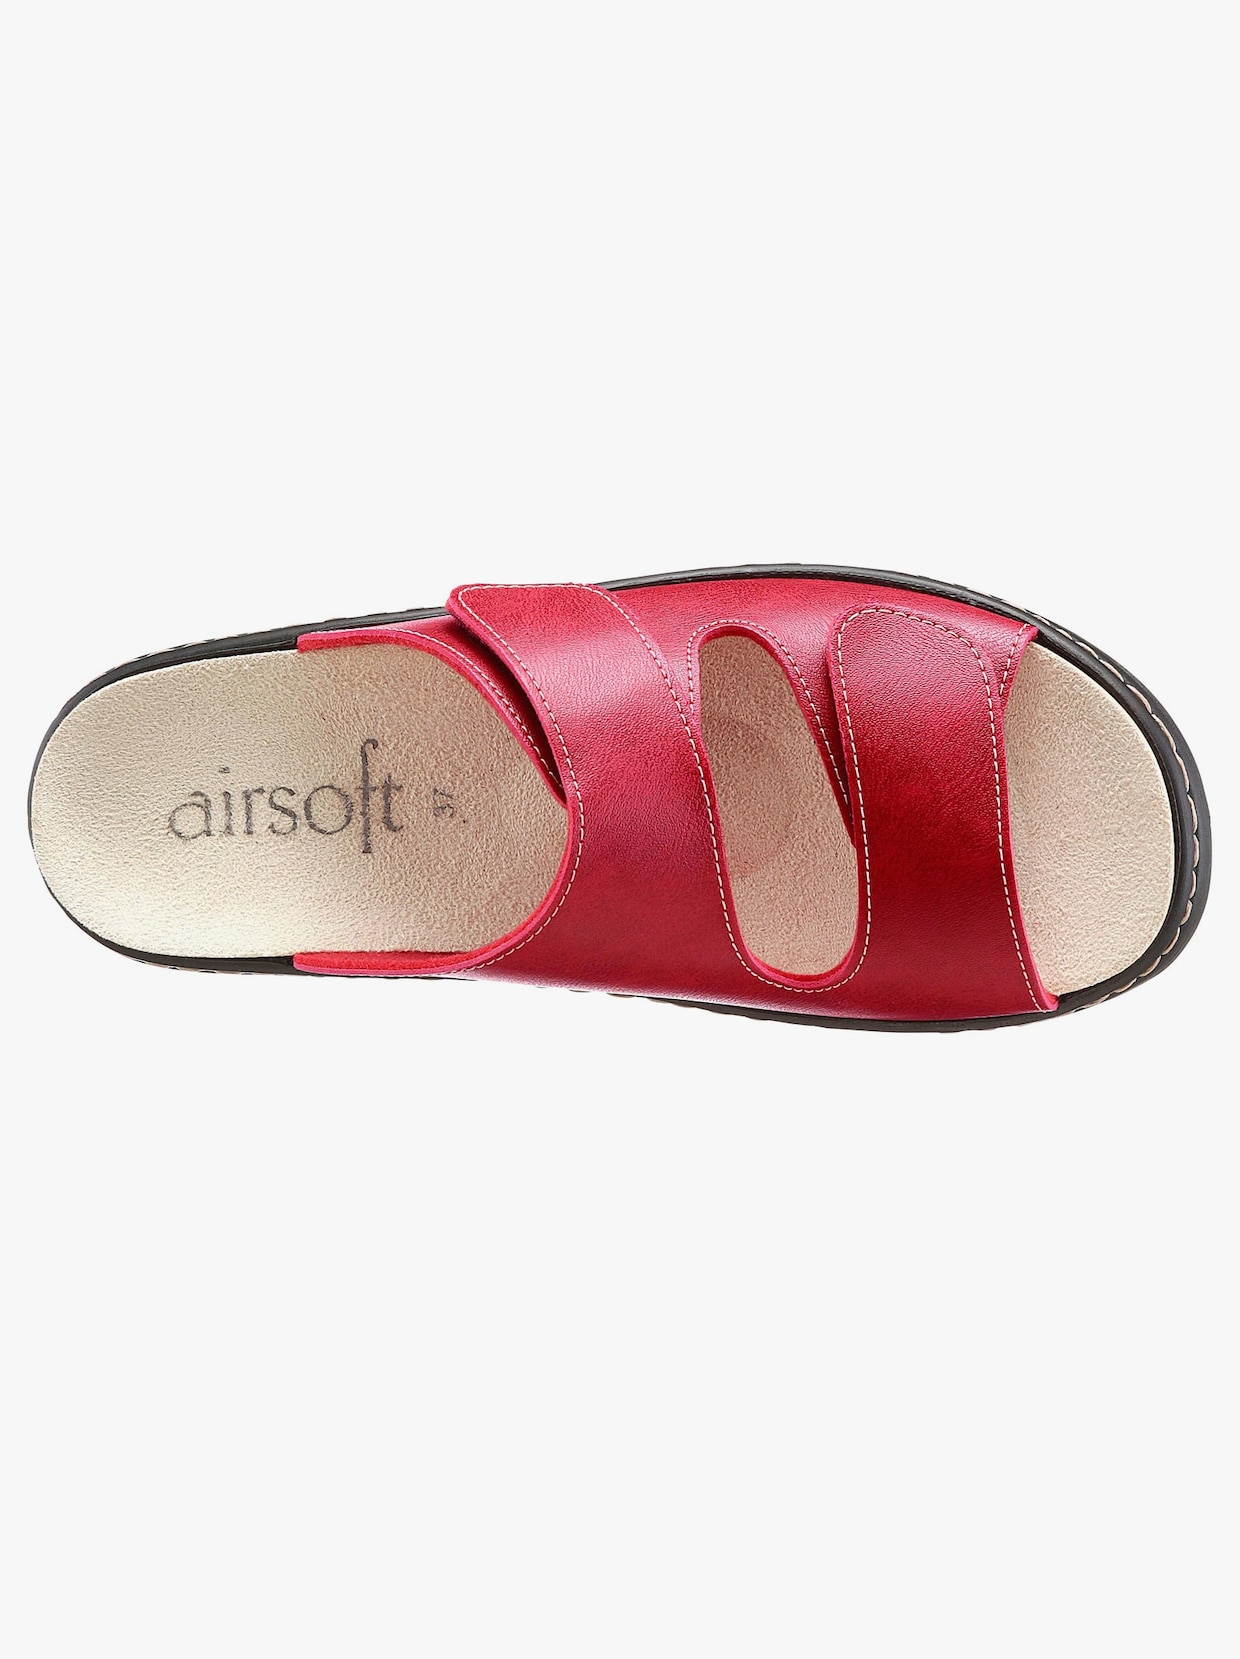 Airsoft slippers - rood